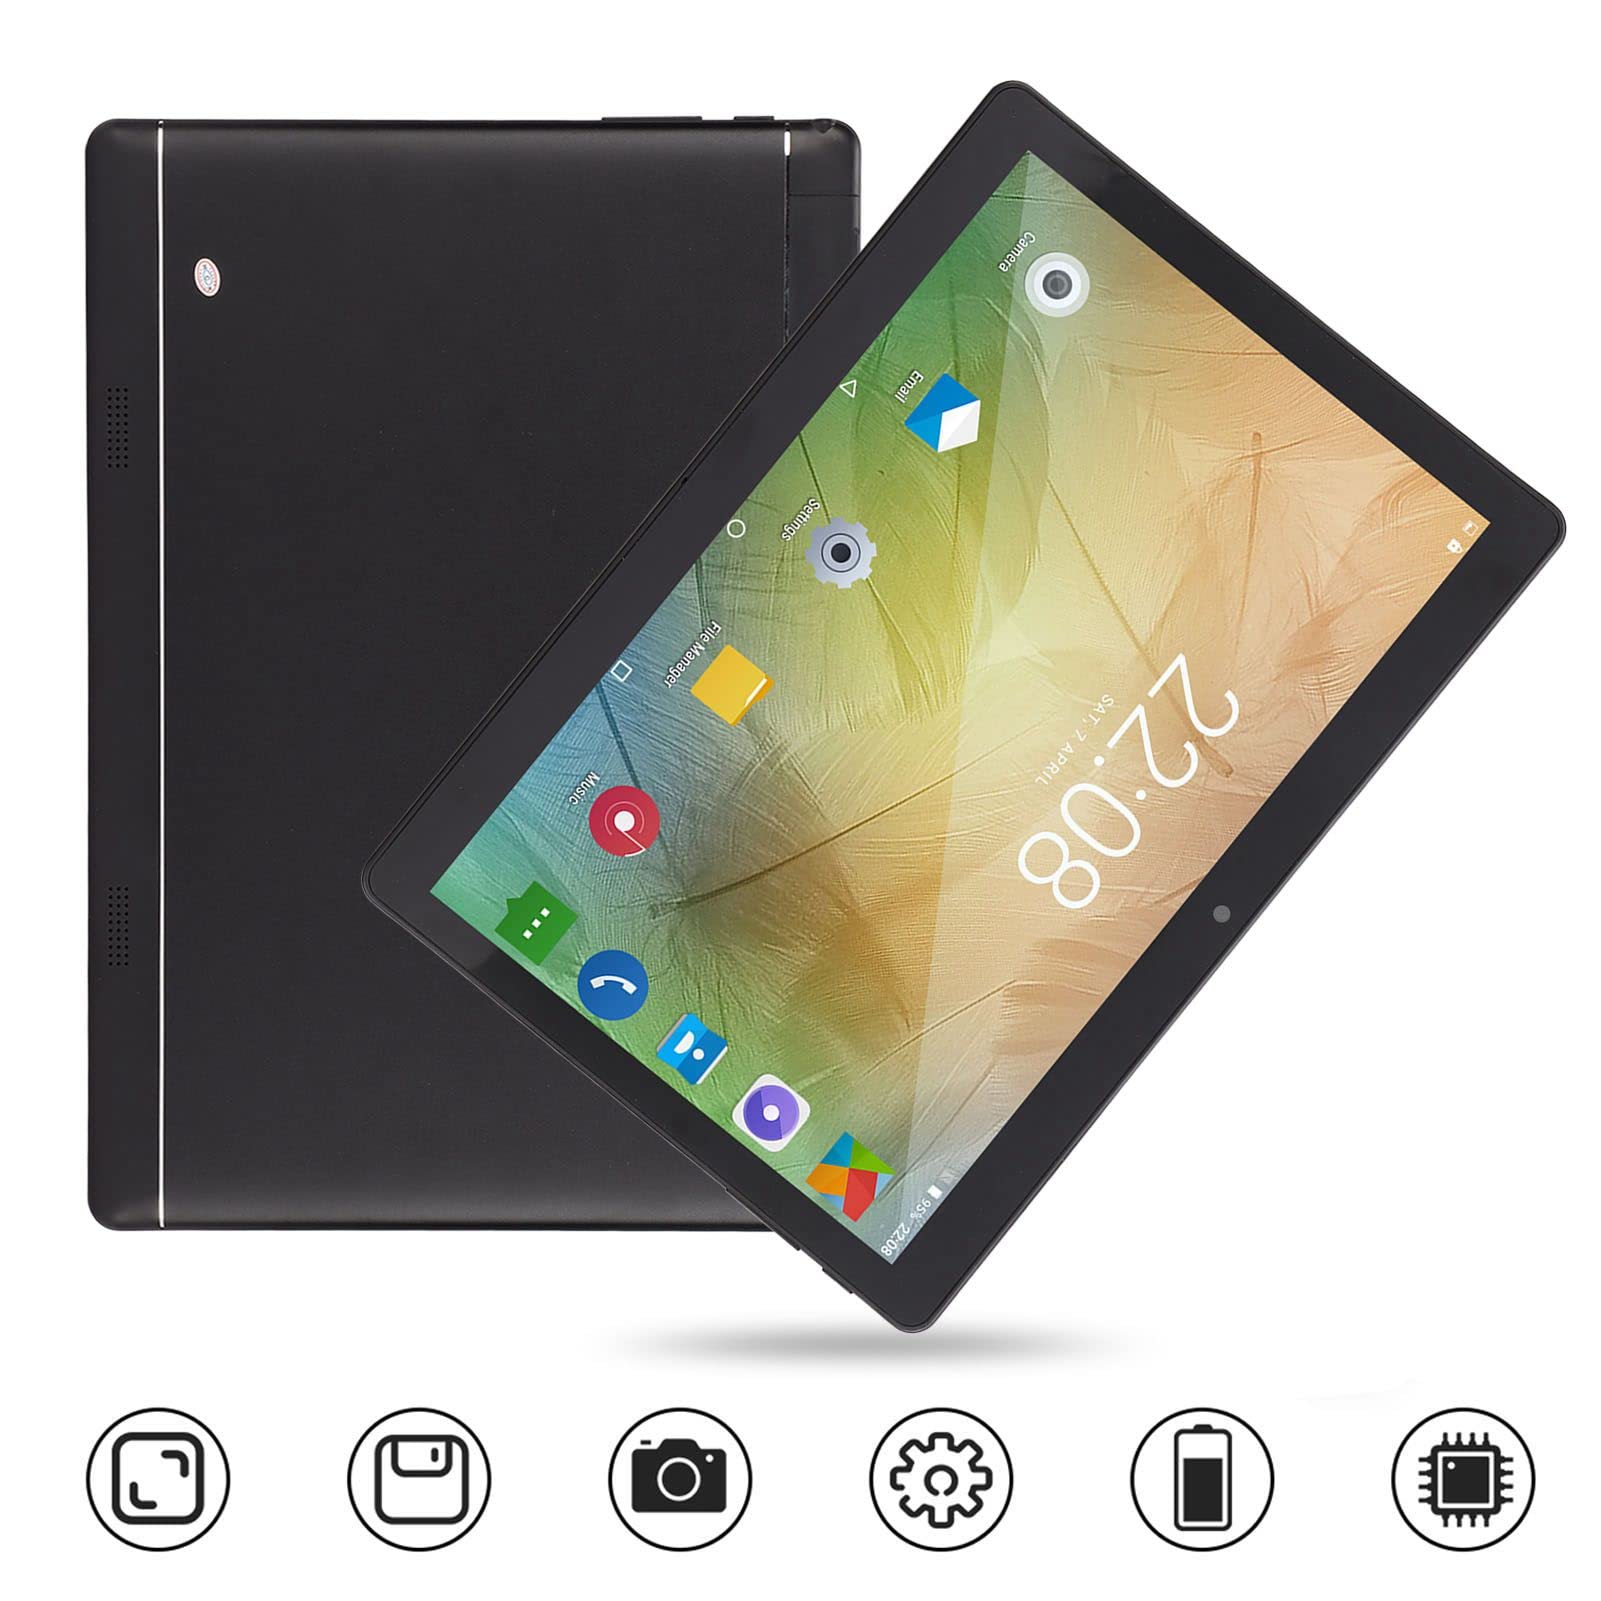 Luqeeg 10 inch Tablet - 1080P Full HD Kids Edition Tablet, Android 11, Dual SIM, Octa Core CPU, 3GB & 32GB, 3G Network, WiFi, GPS, Bluetooth, 4000mAh Fast Charging Battery(Black)